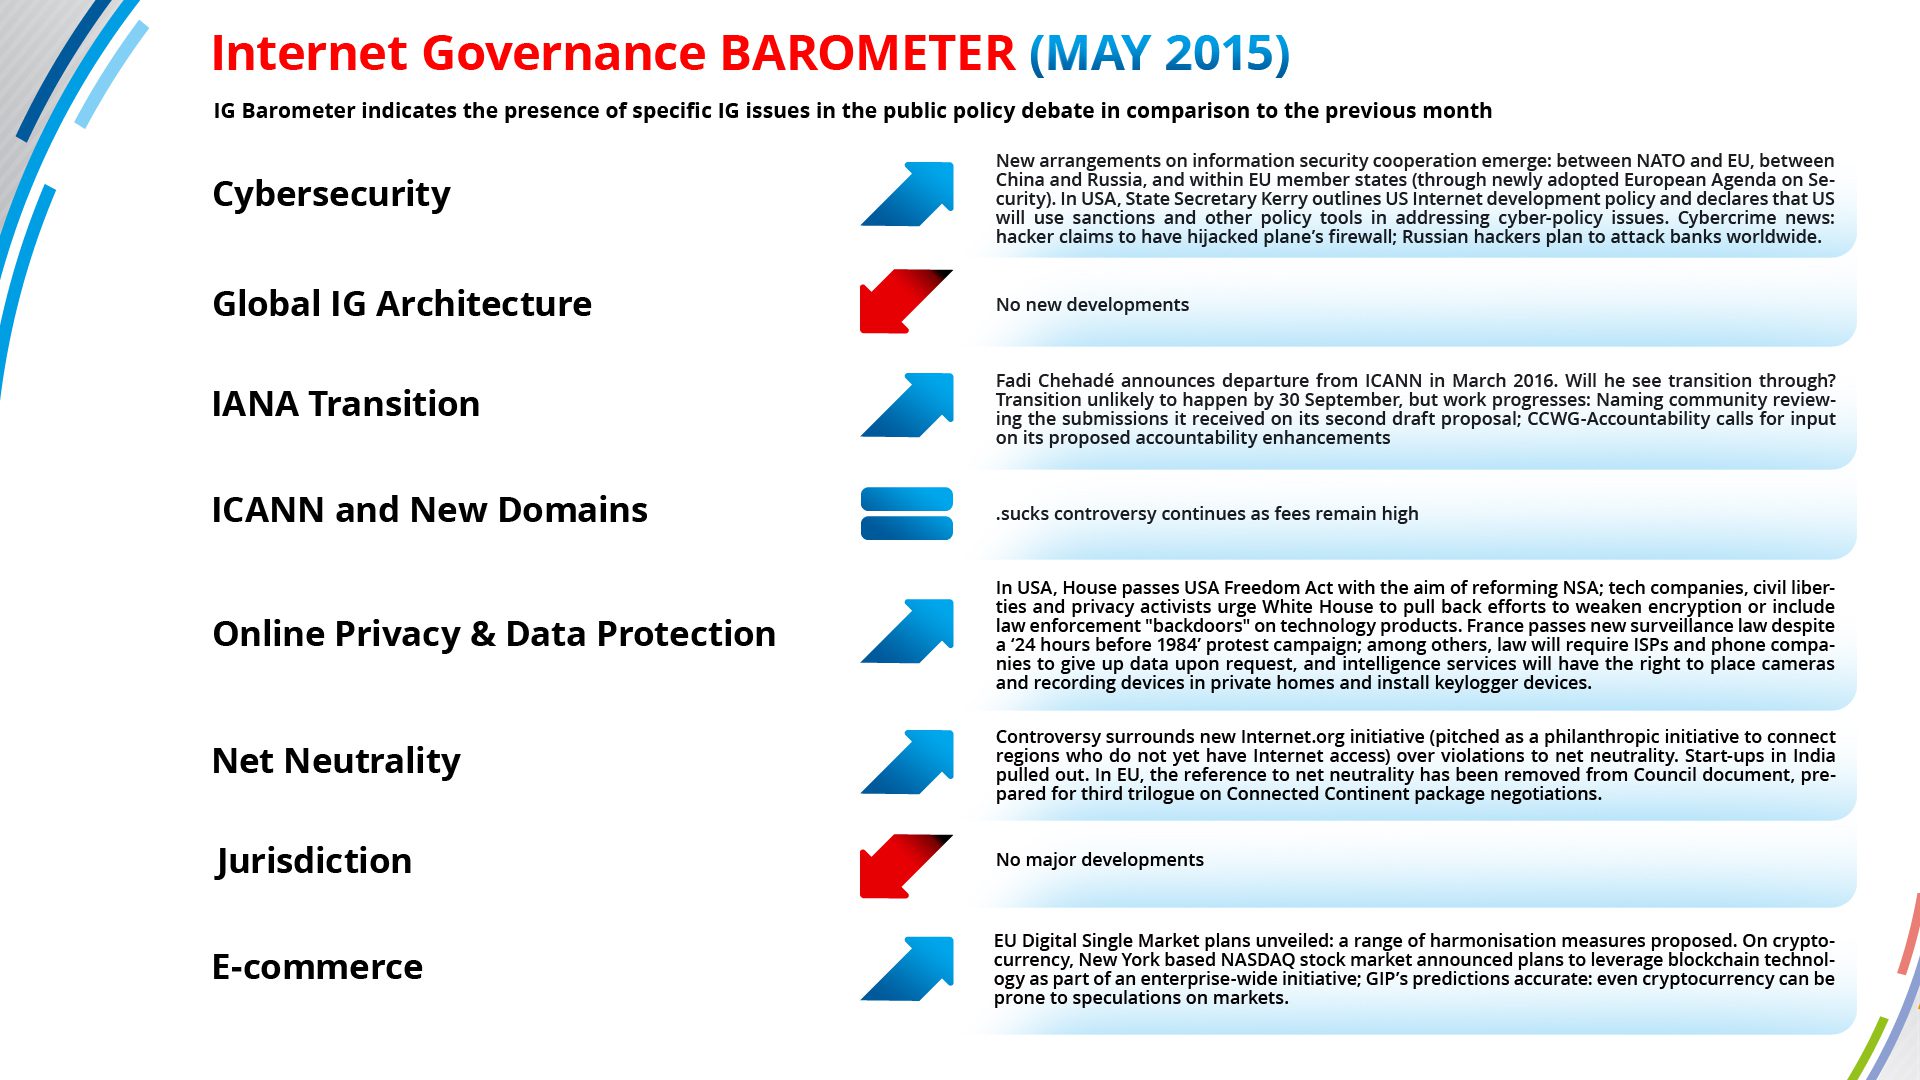 [Briefing #15] Internet governance in May 2015